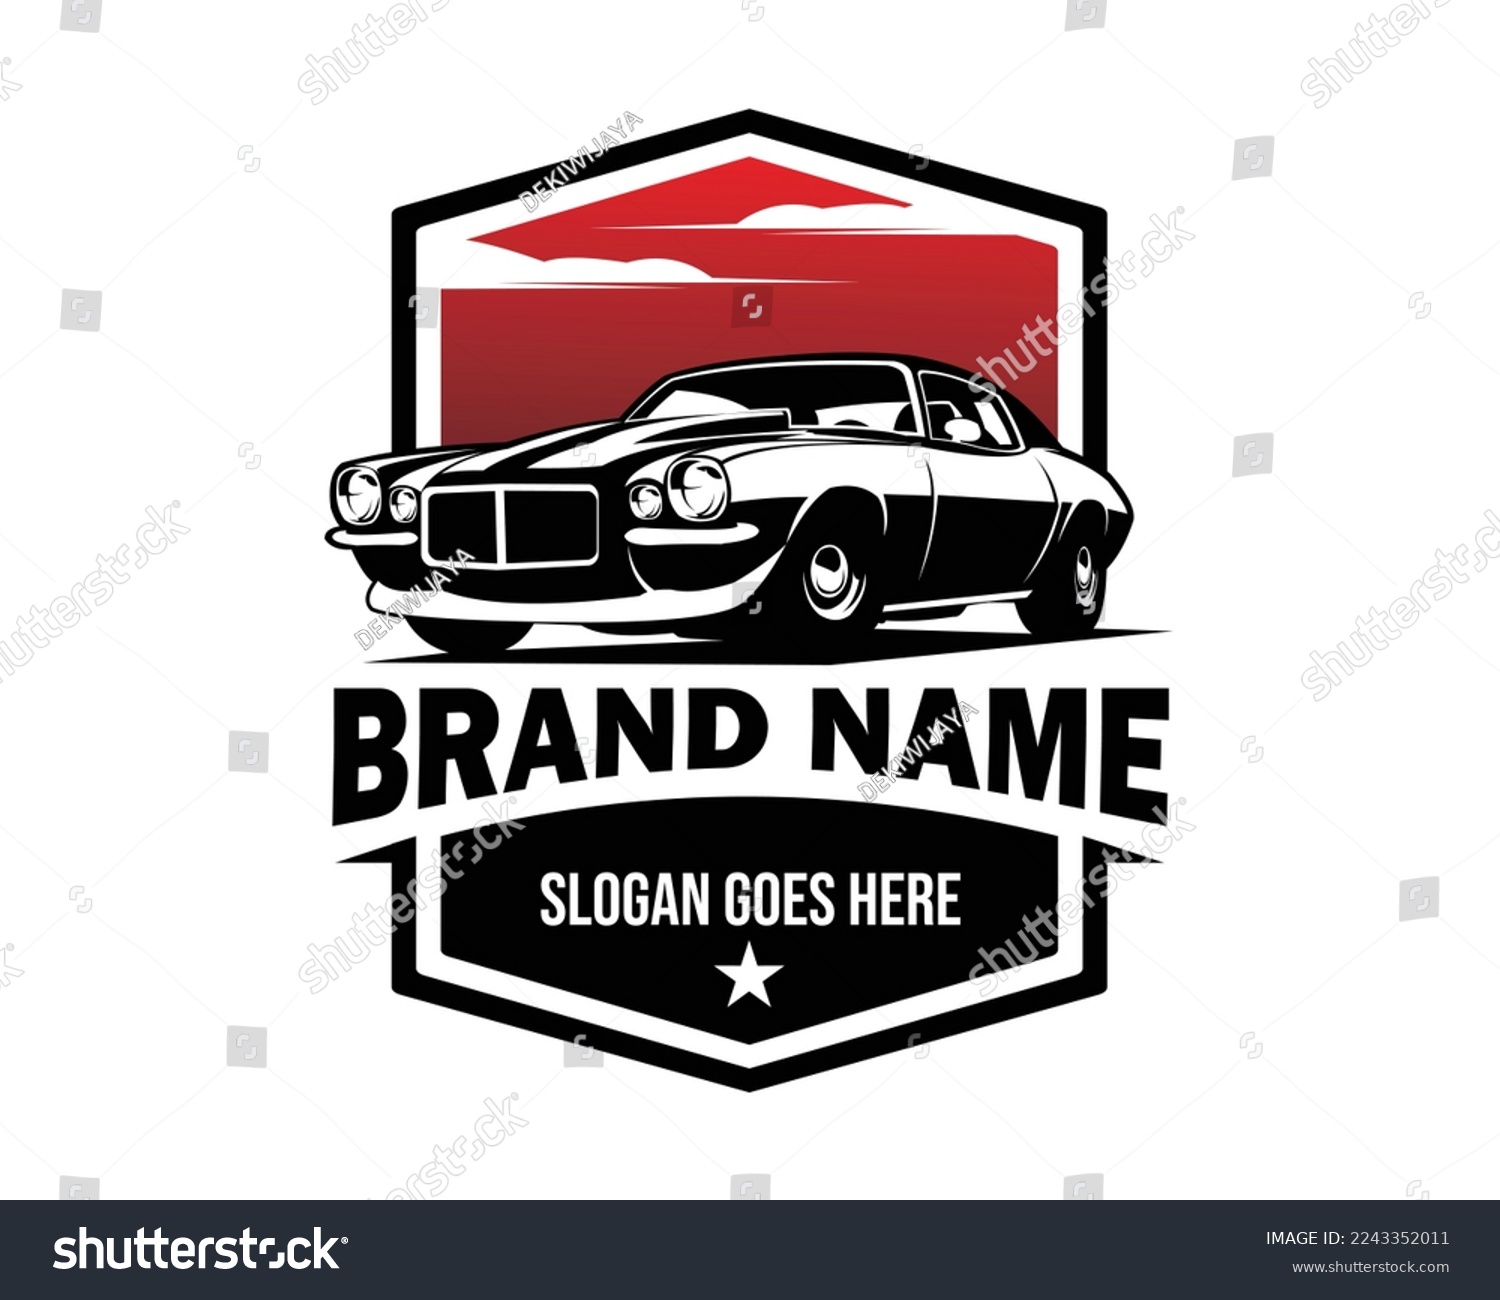 SVG of 1970 chevy camaro. white background isolated vector silhouette showing from the front. Best for badge, emblem, icon, sticker design, car industry. svg